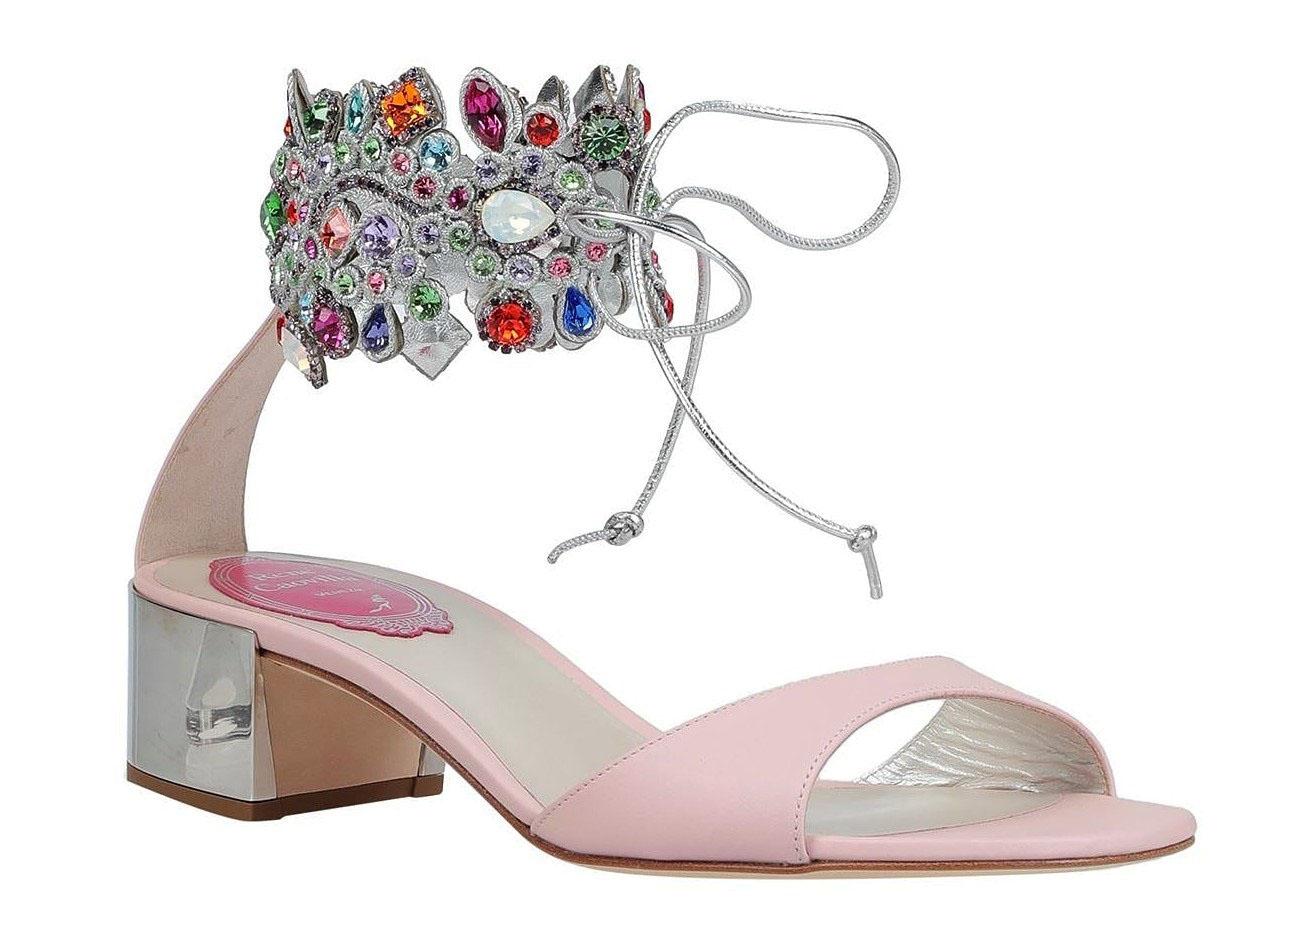 New Rene Caovilla Pink Leather Jeweled Flats Sandals
Sizes available - 36, 37, 37.5, 39, 40. ( US 6, 7, 7.5, 9, 10 )
Lamb Leather, Soft Pink Color, Ankle Jeweled Wrap, Front Tie Closure, Silver-Tone Metallic Heel - 1.5 inches.
Made in Italy.
New